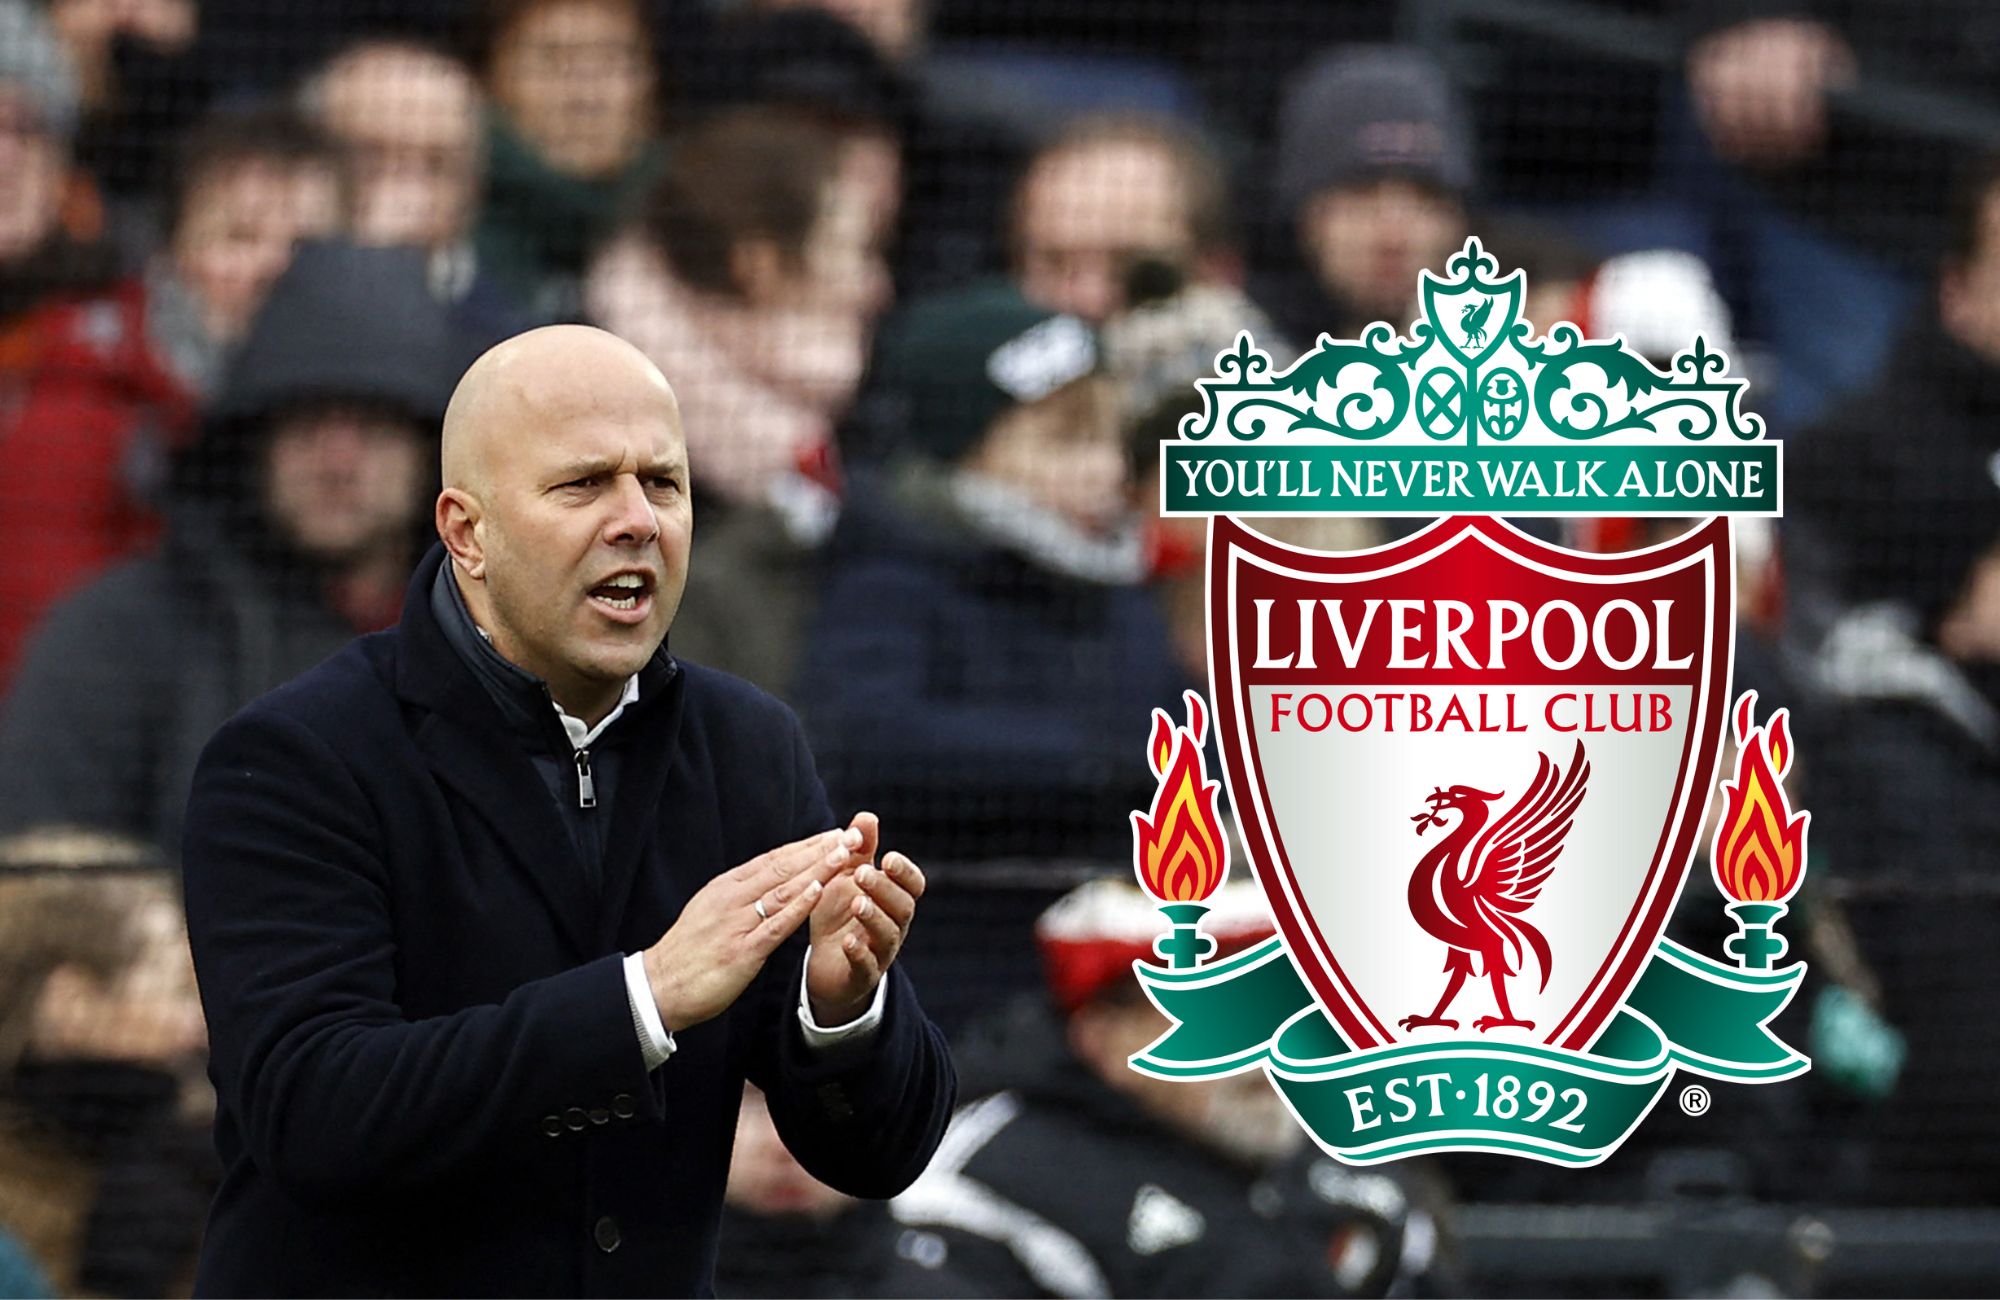 Slot’s first Liverpool signing: Dutch journalist tips sensational Feyenoord player for Anfield switch